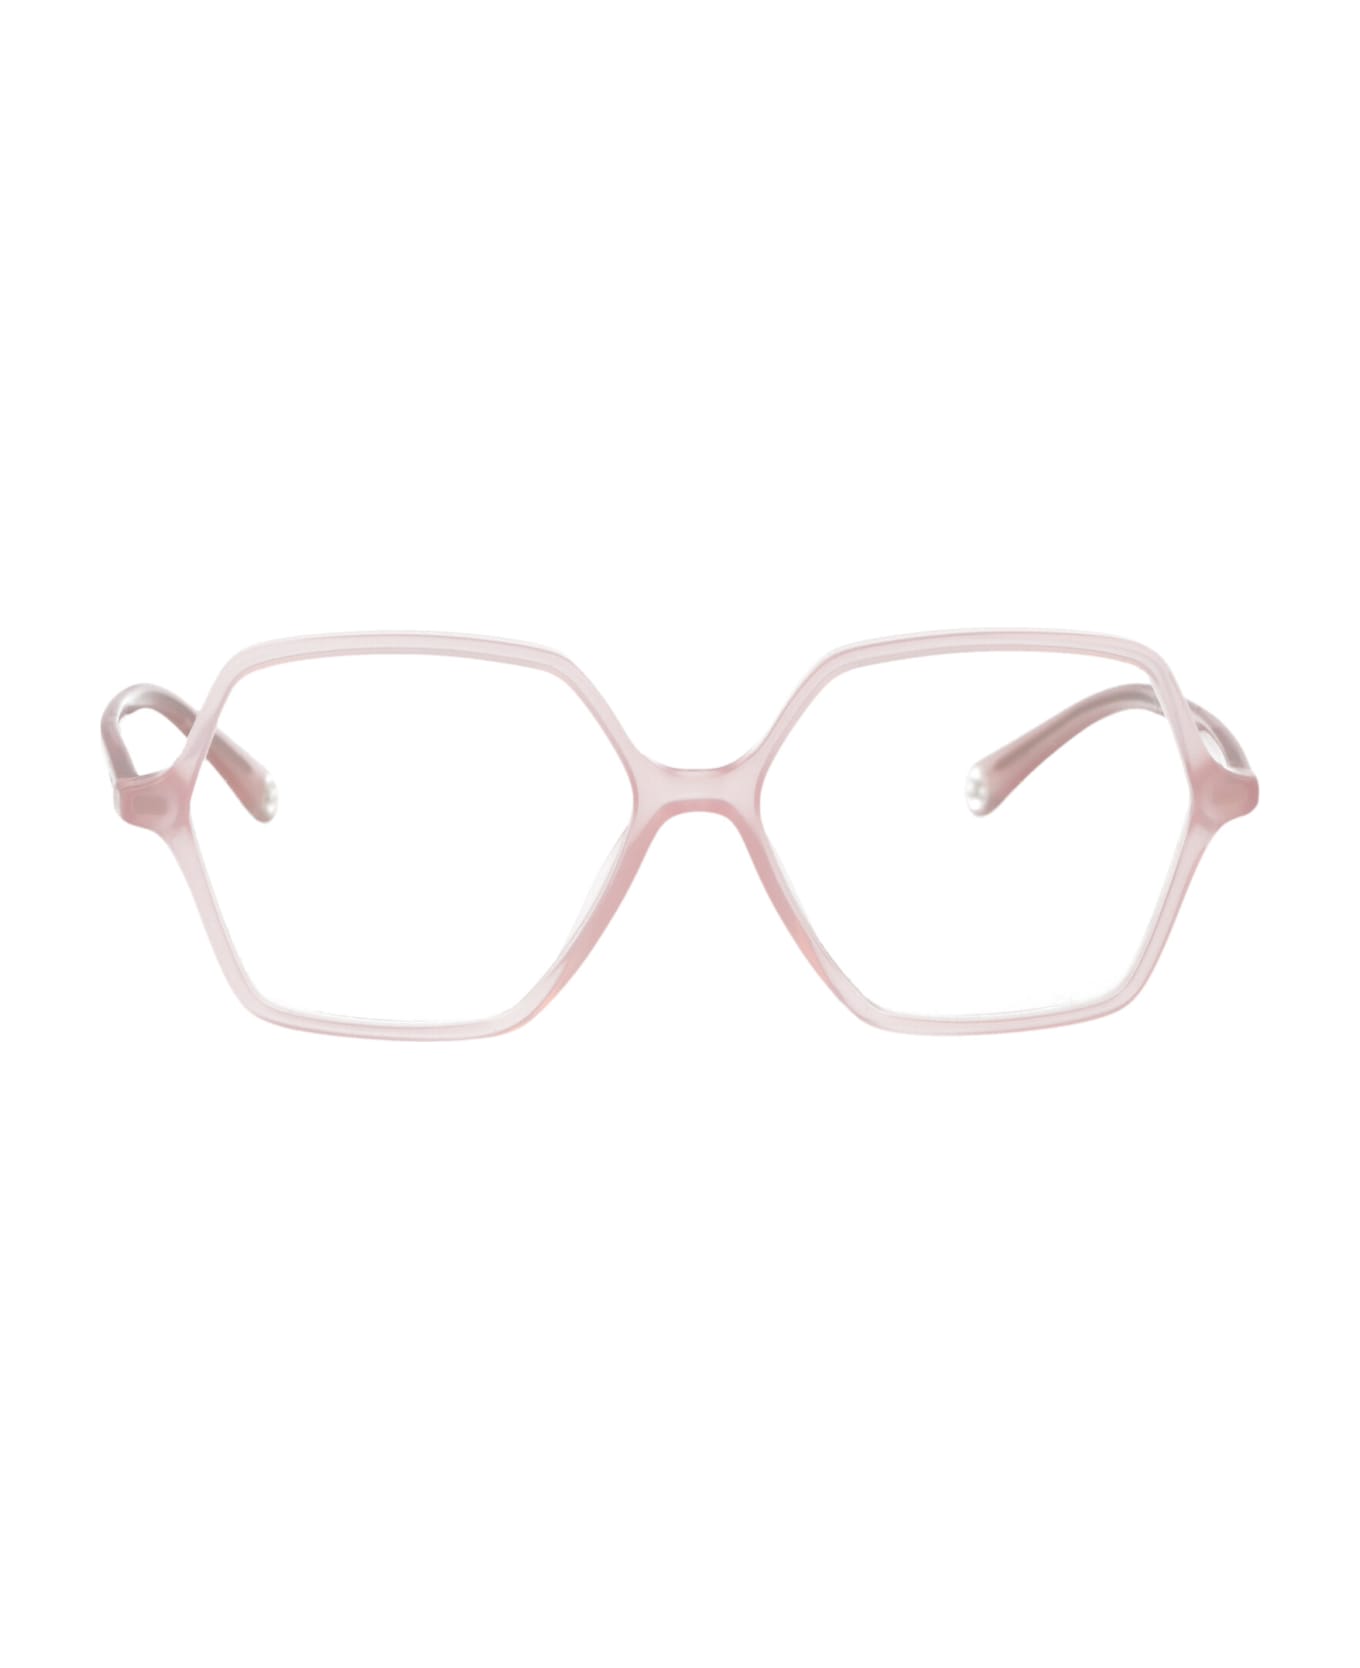 Chanel 0ch3447 Glasses - 1733 PINK